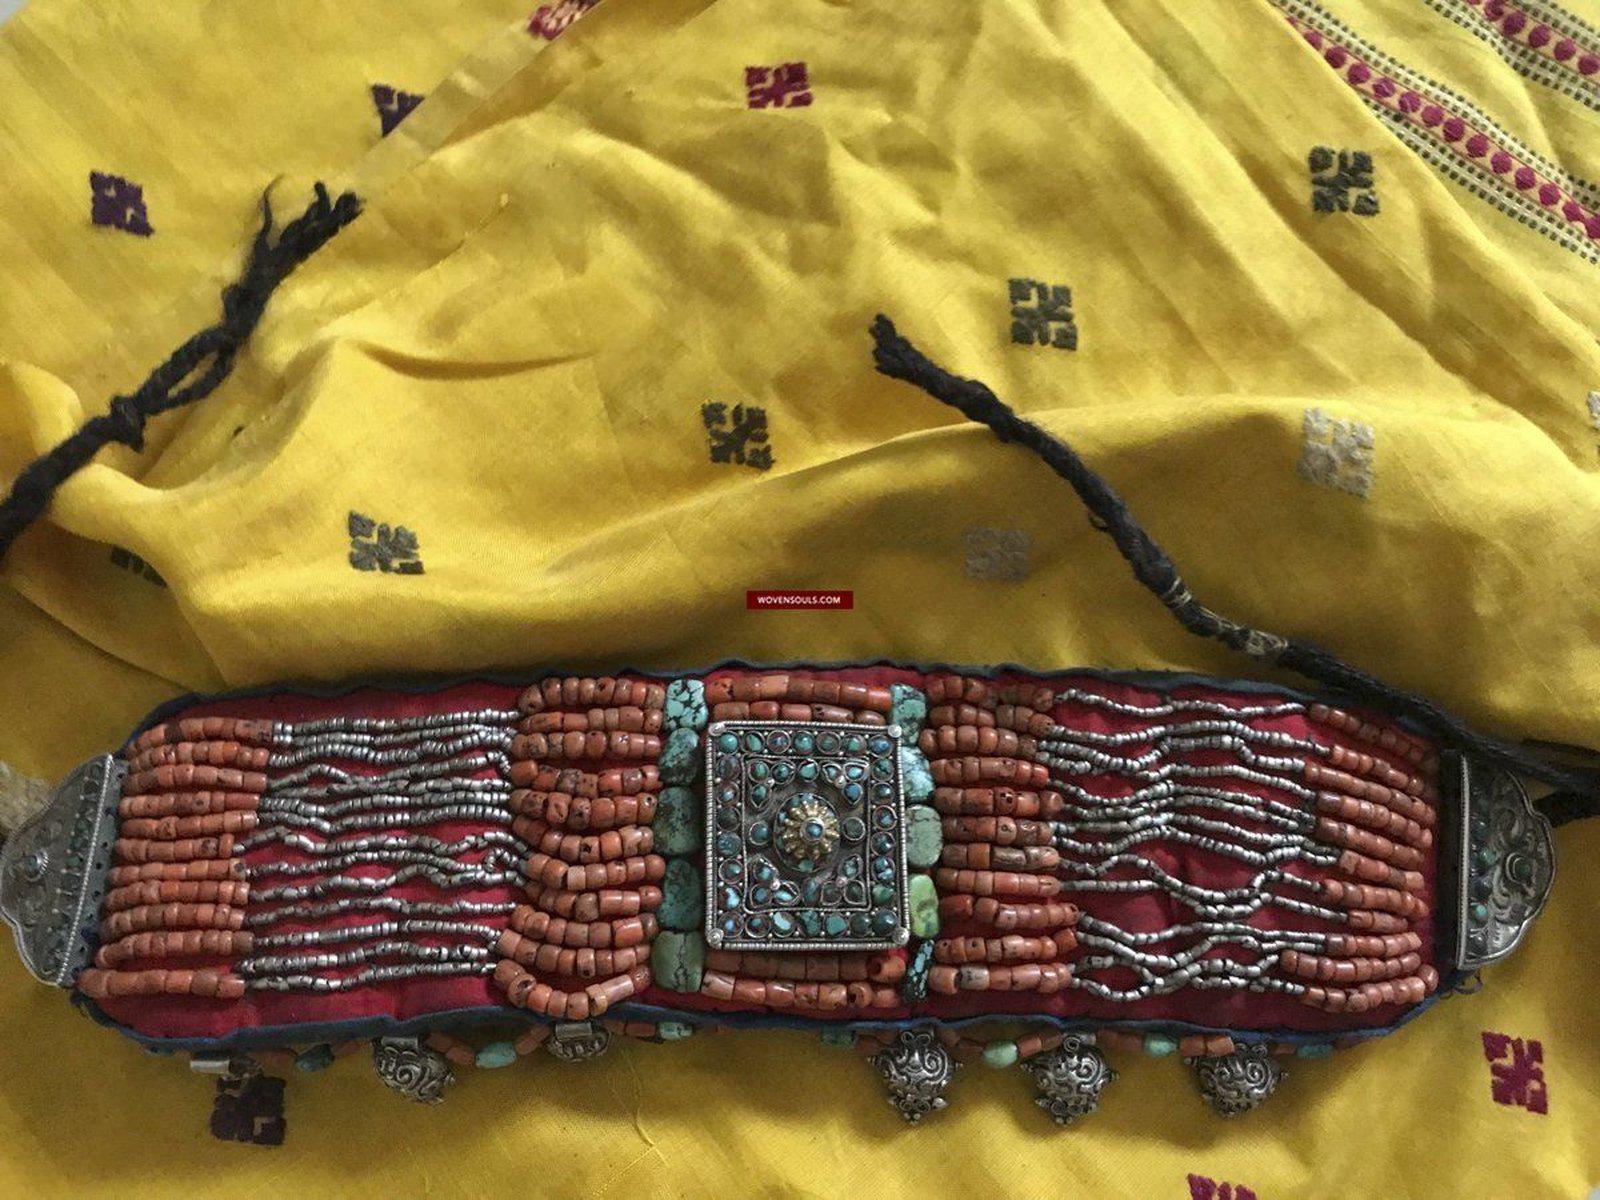 1281 SOLD Rare Old Ladakh Heirloom Jewelry with Gold Gilt-WOVENSOULS-Antique-Vintage-Textiles-Art-Decor